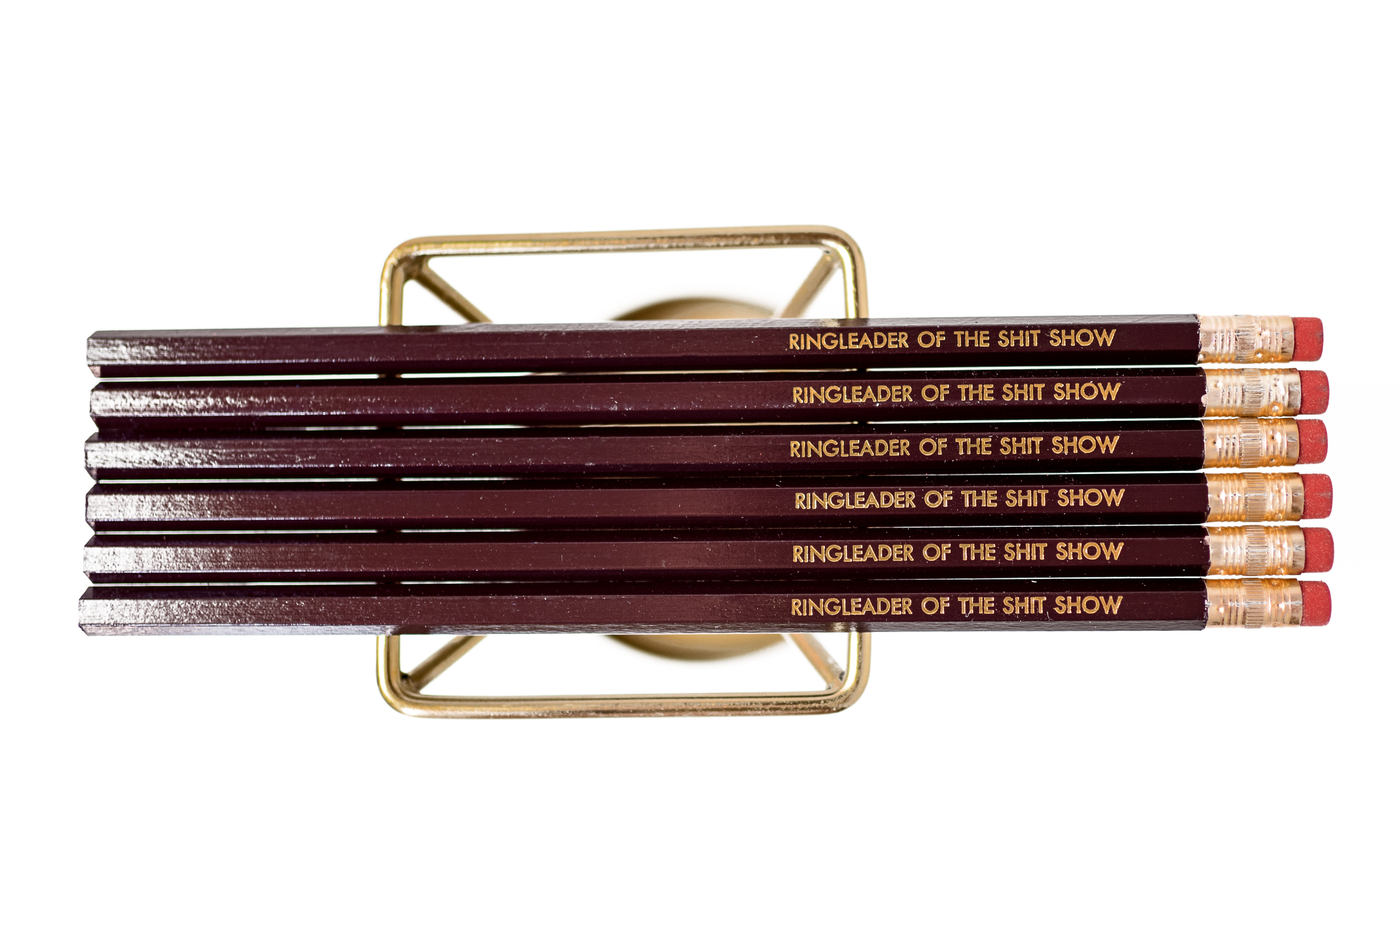 Ringleader of the Shit Show Pencils